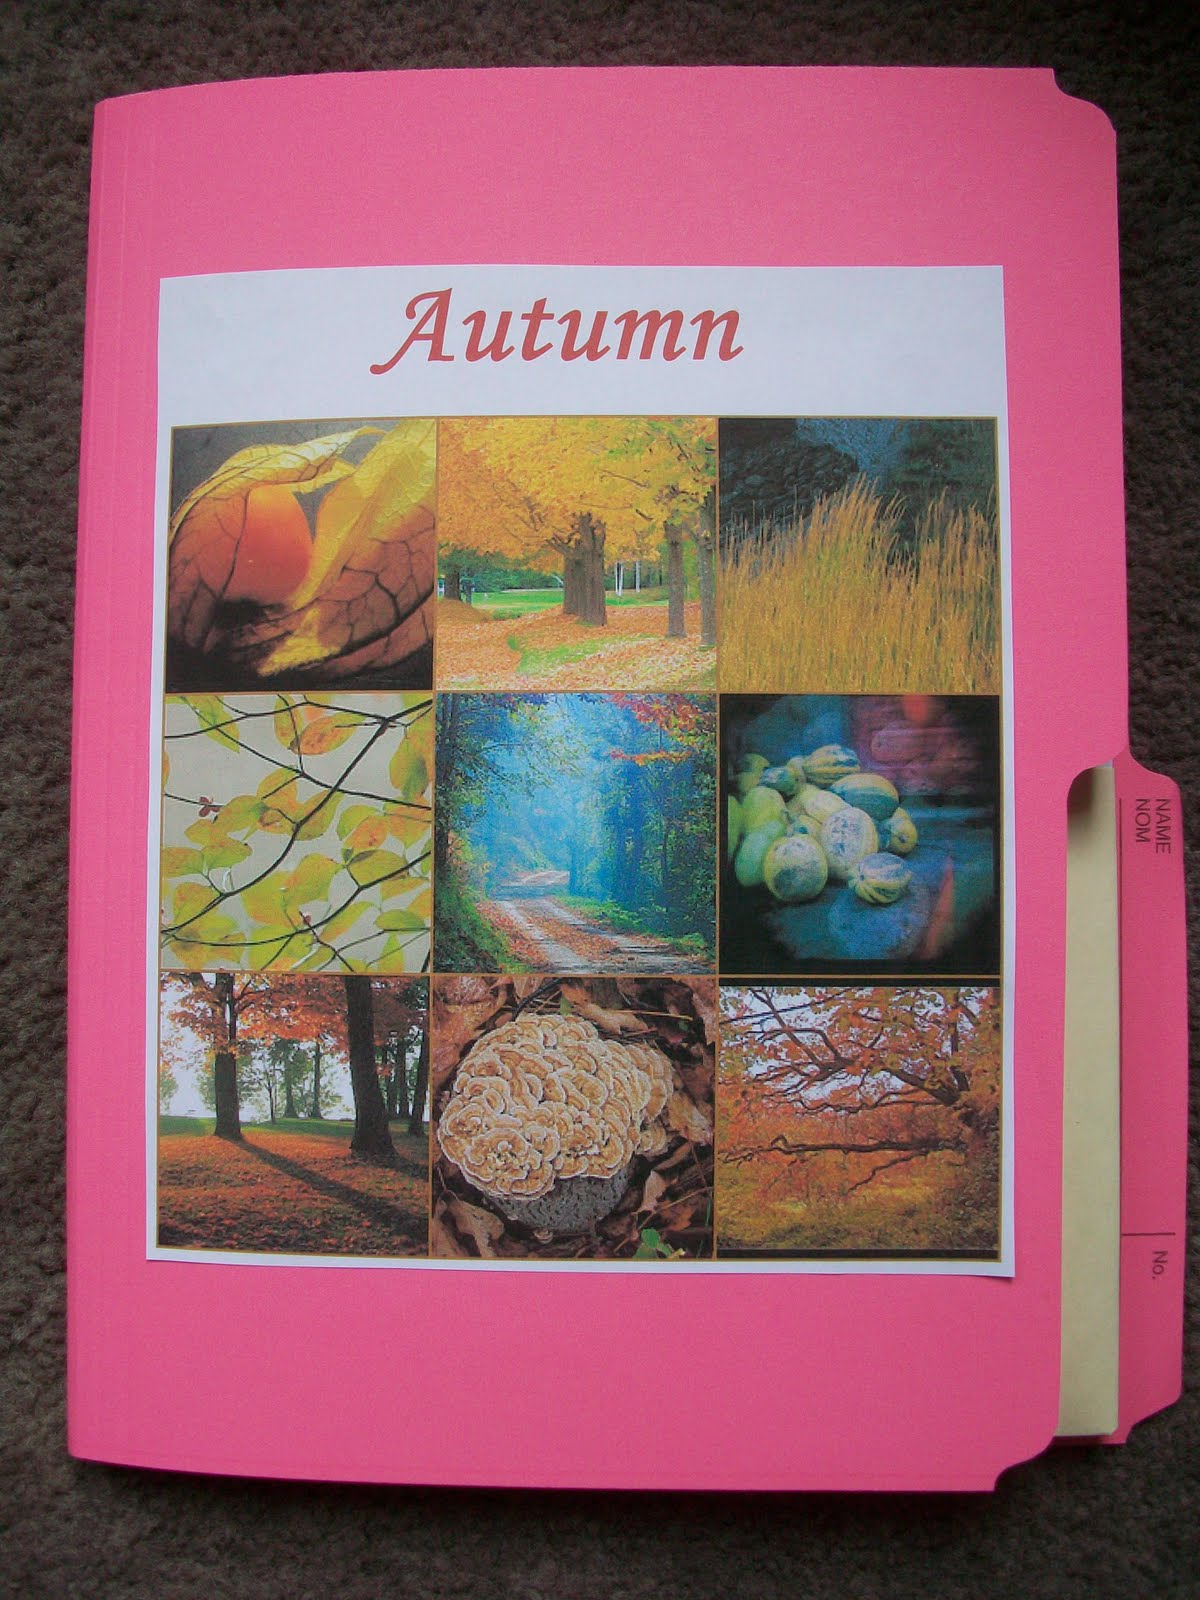 Created 2B Creative: Autumn Treasures DNG - Product Review